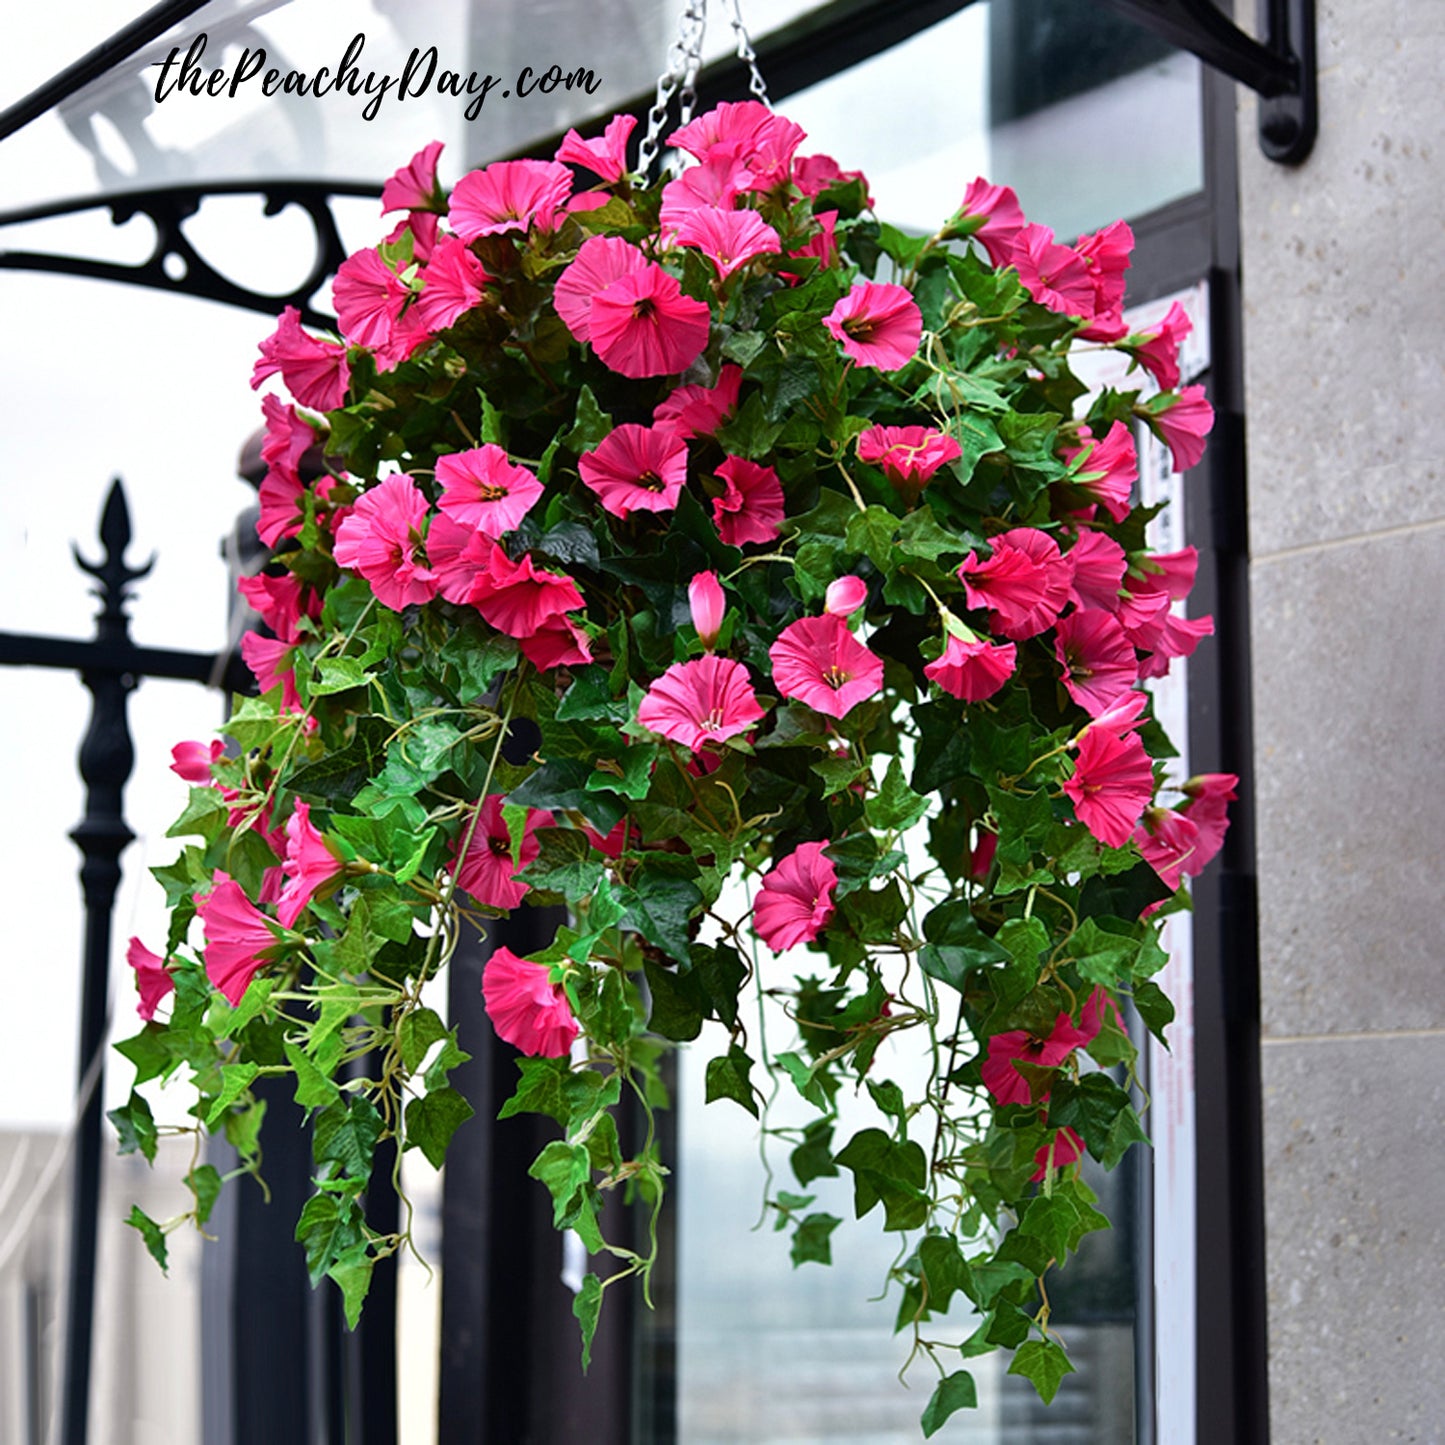 25.6" Artificial Morning Glory Hanging Flowers